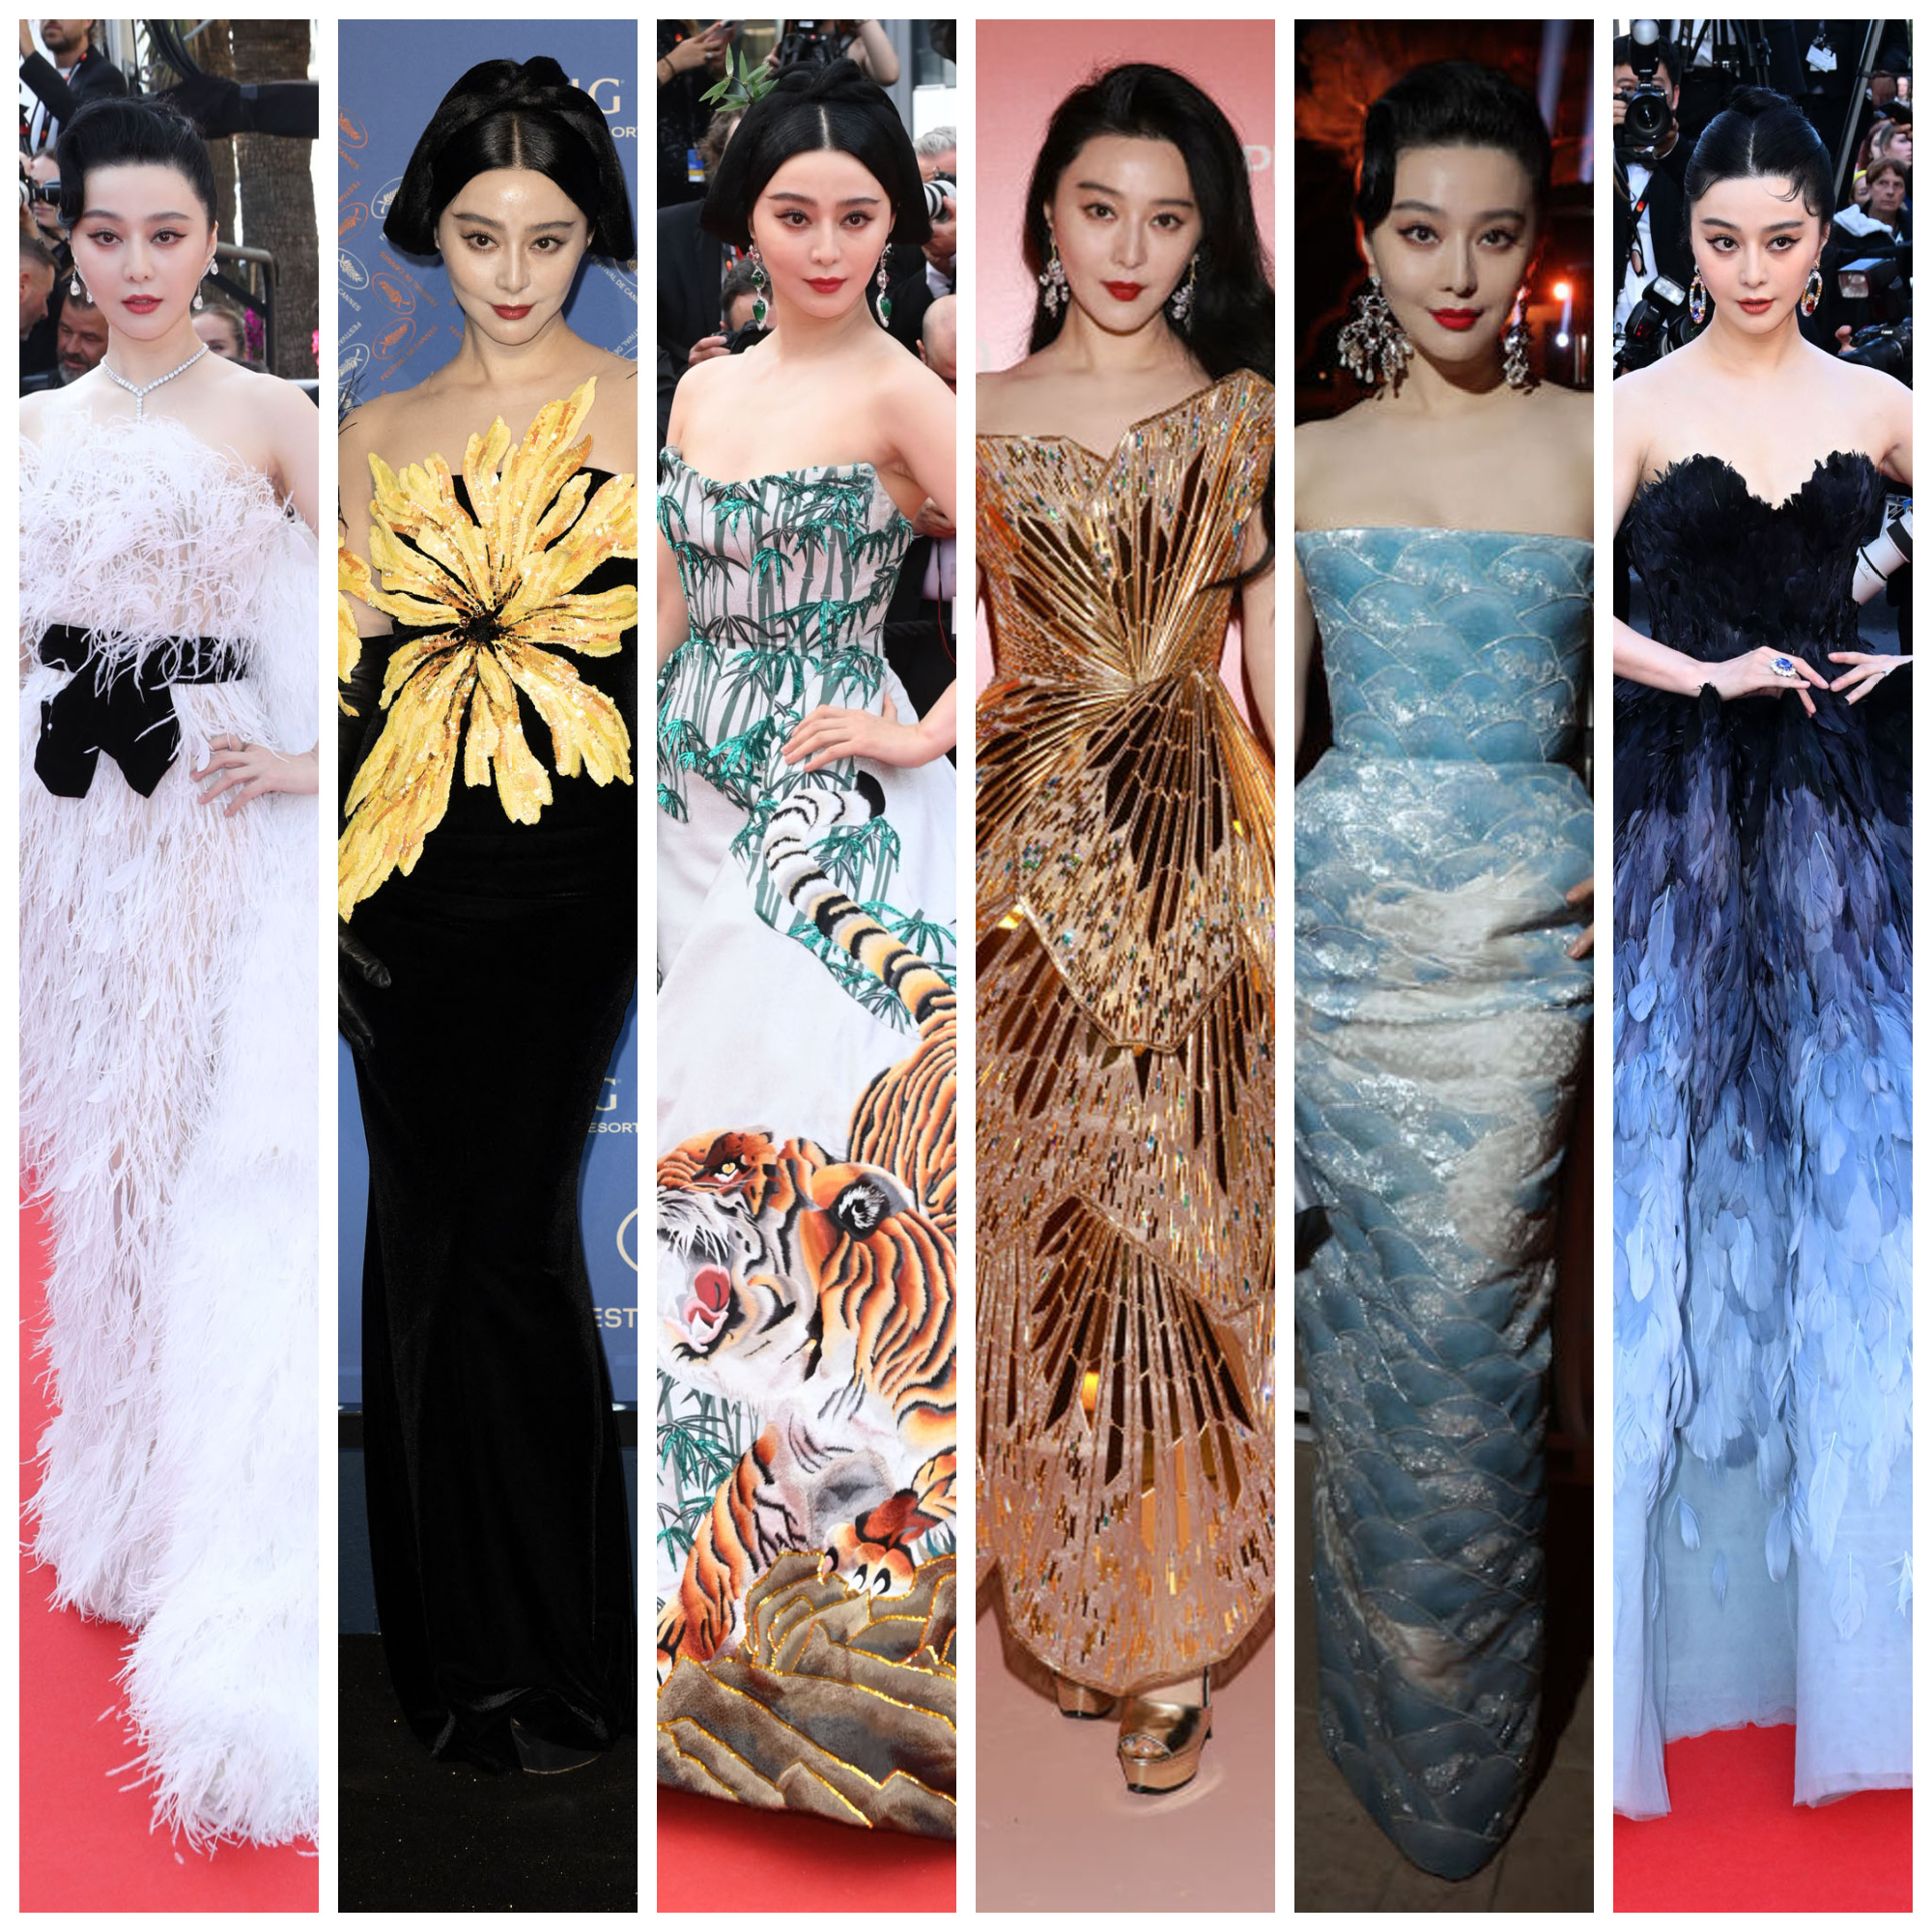 Fan Bingbing's Global Glamour Boosts Luxury Brands at Cannes